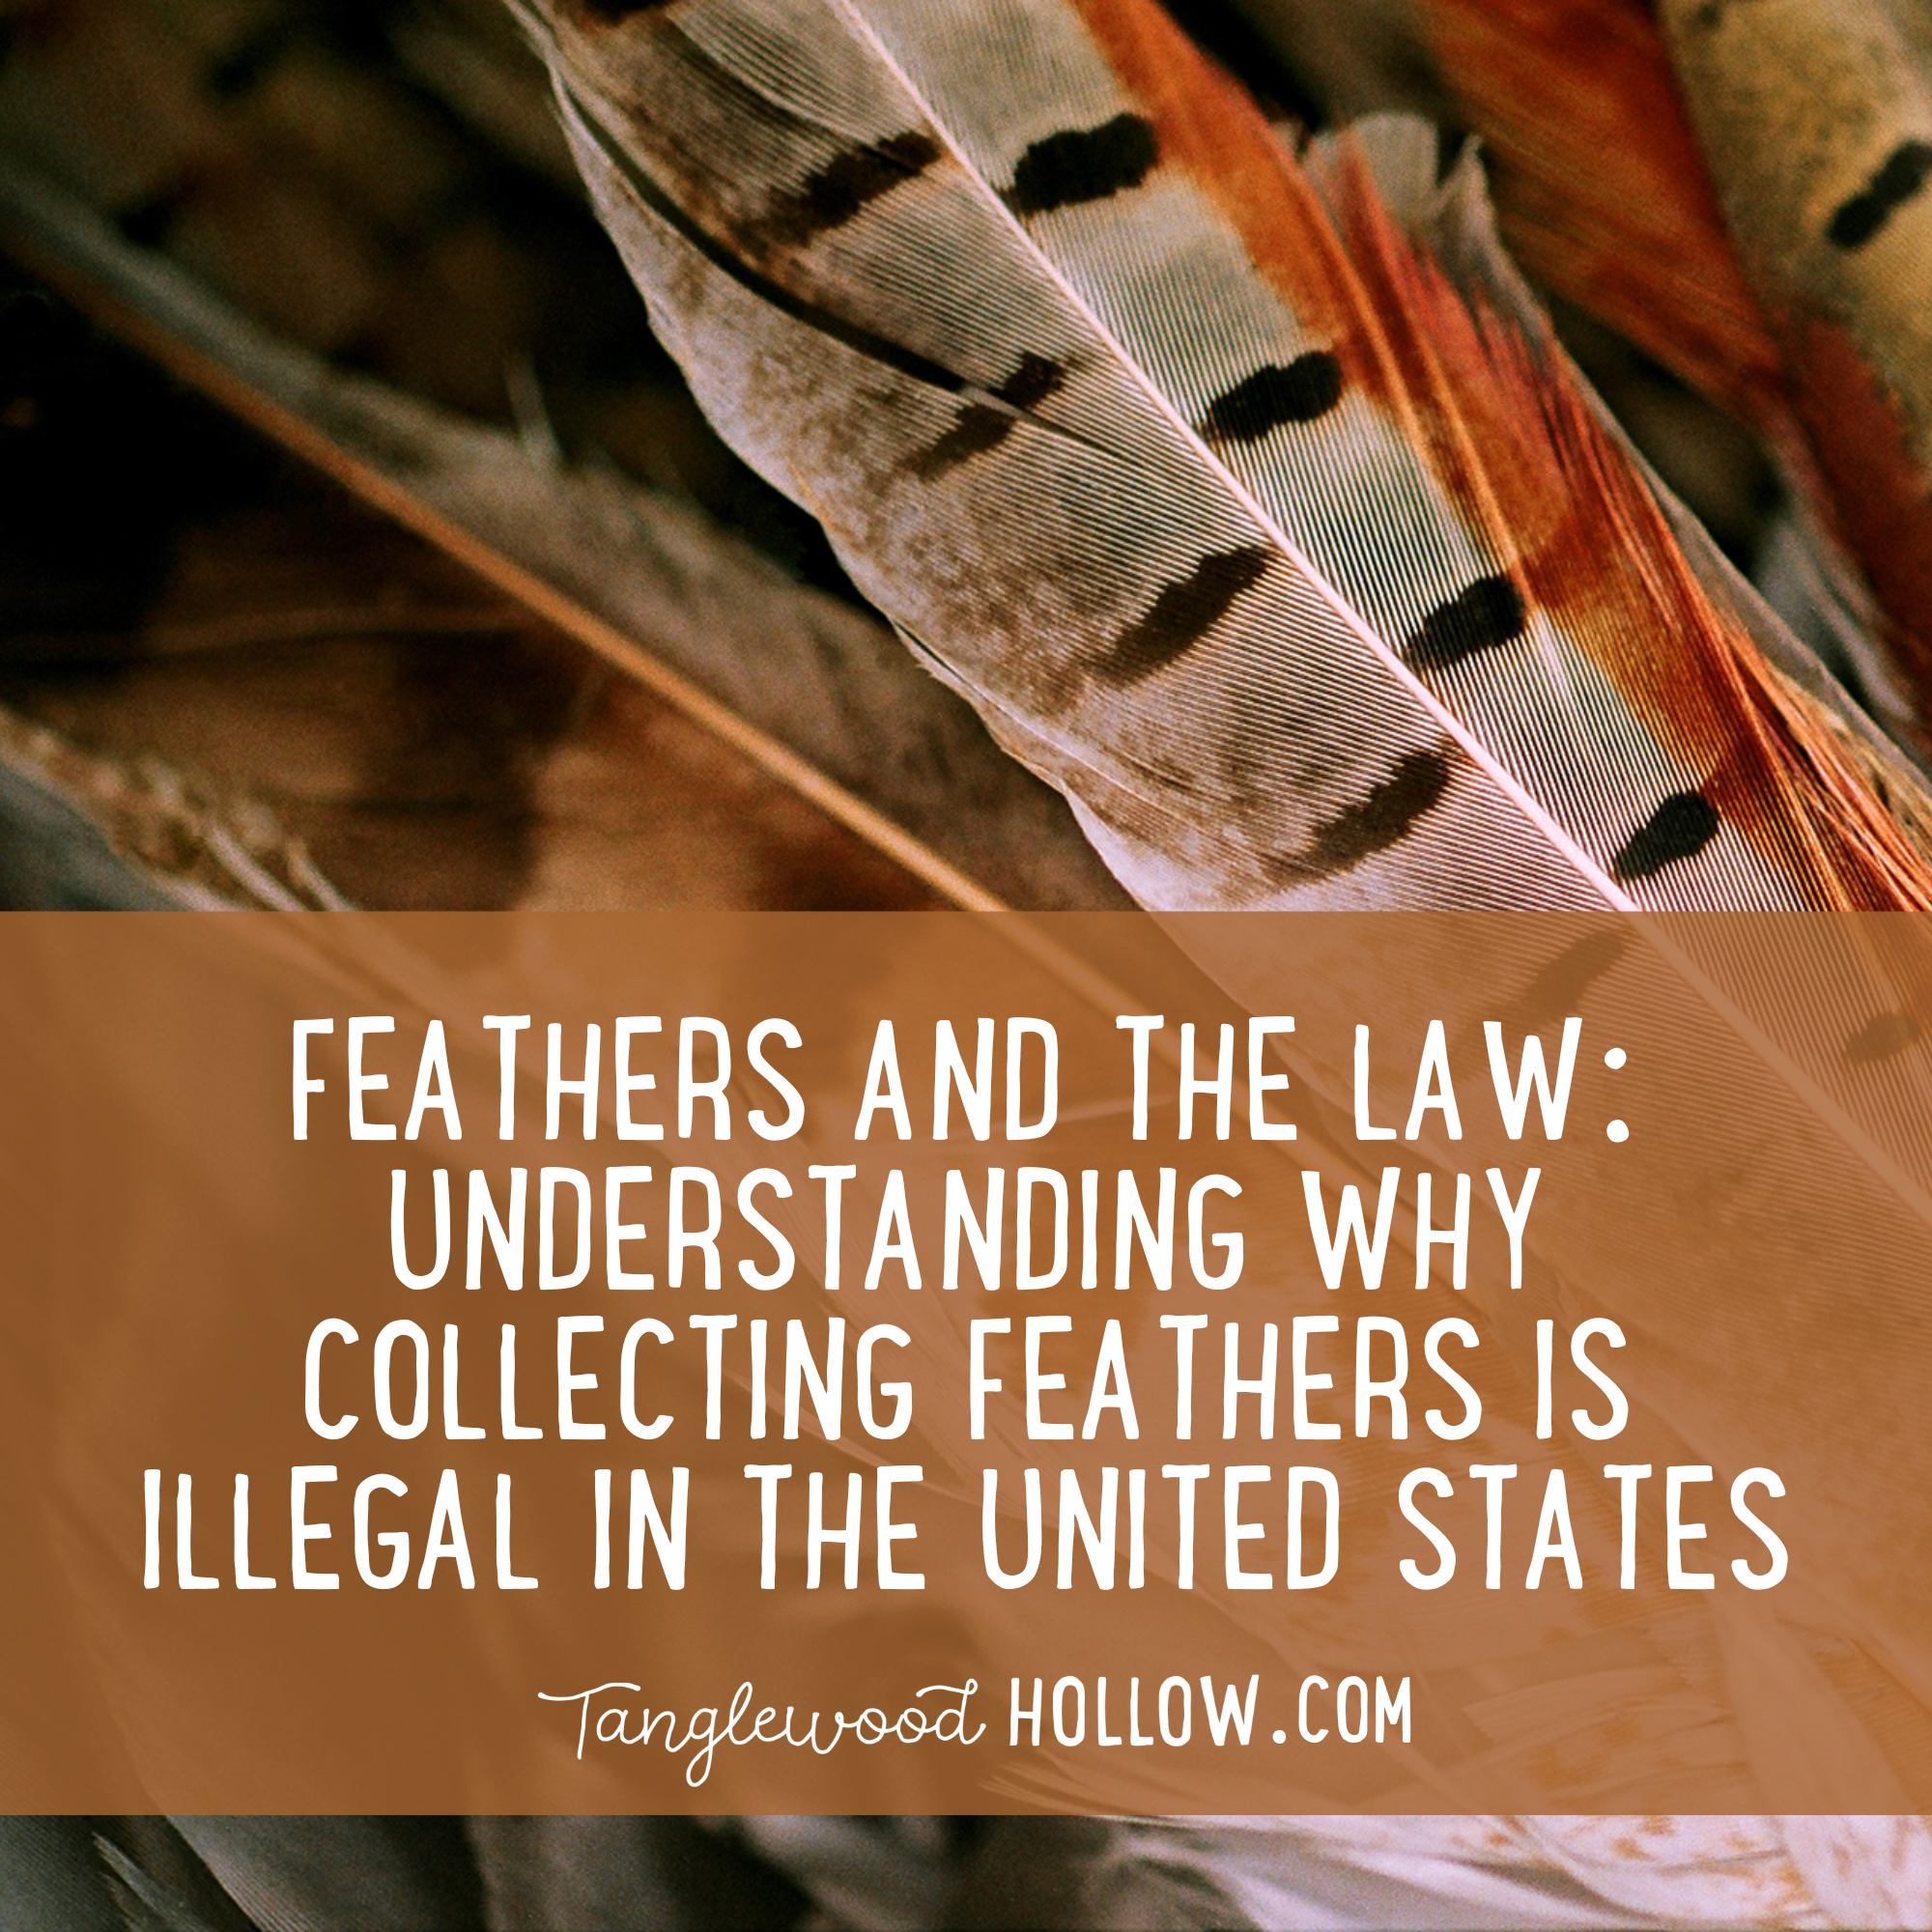 Did you know it's illegal to possess most bird feathers? - Shadows and Light